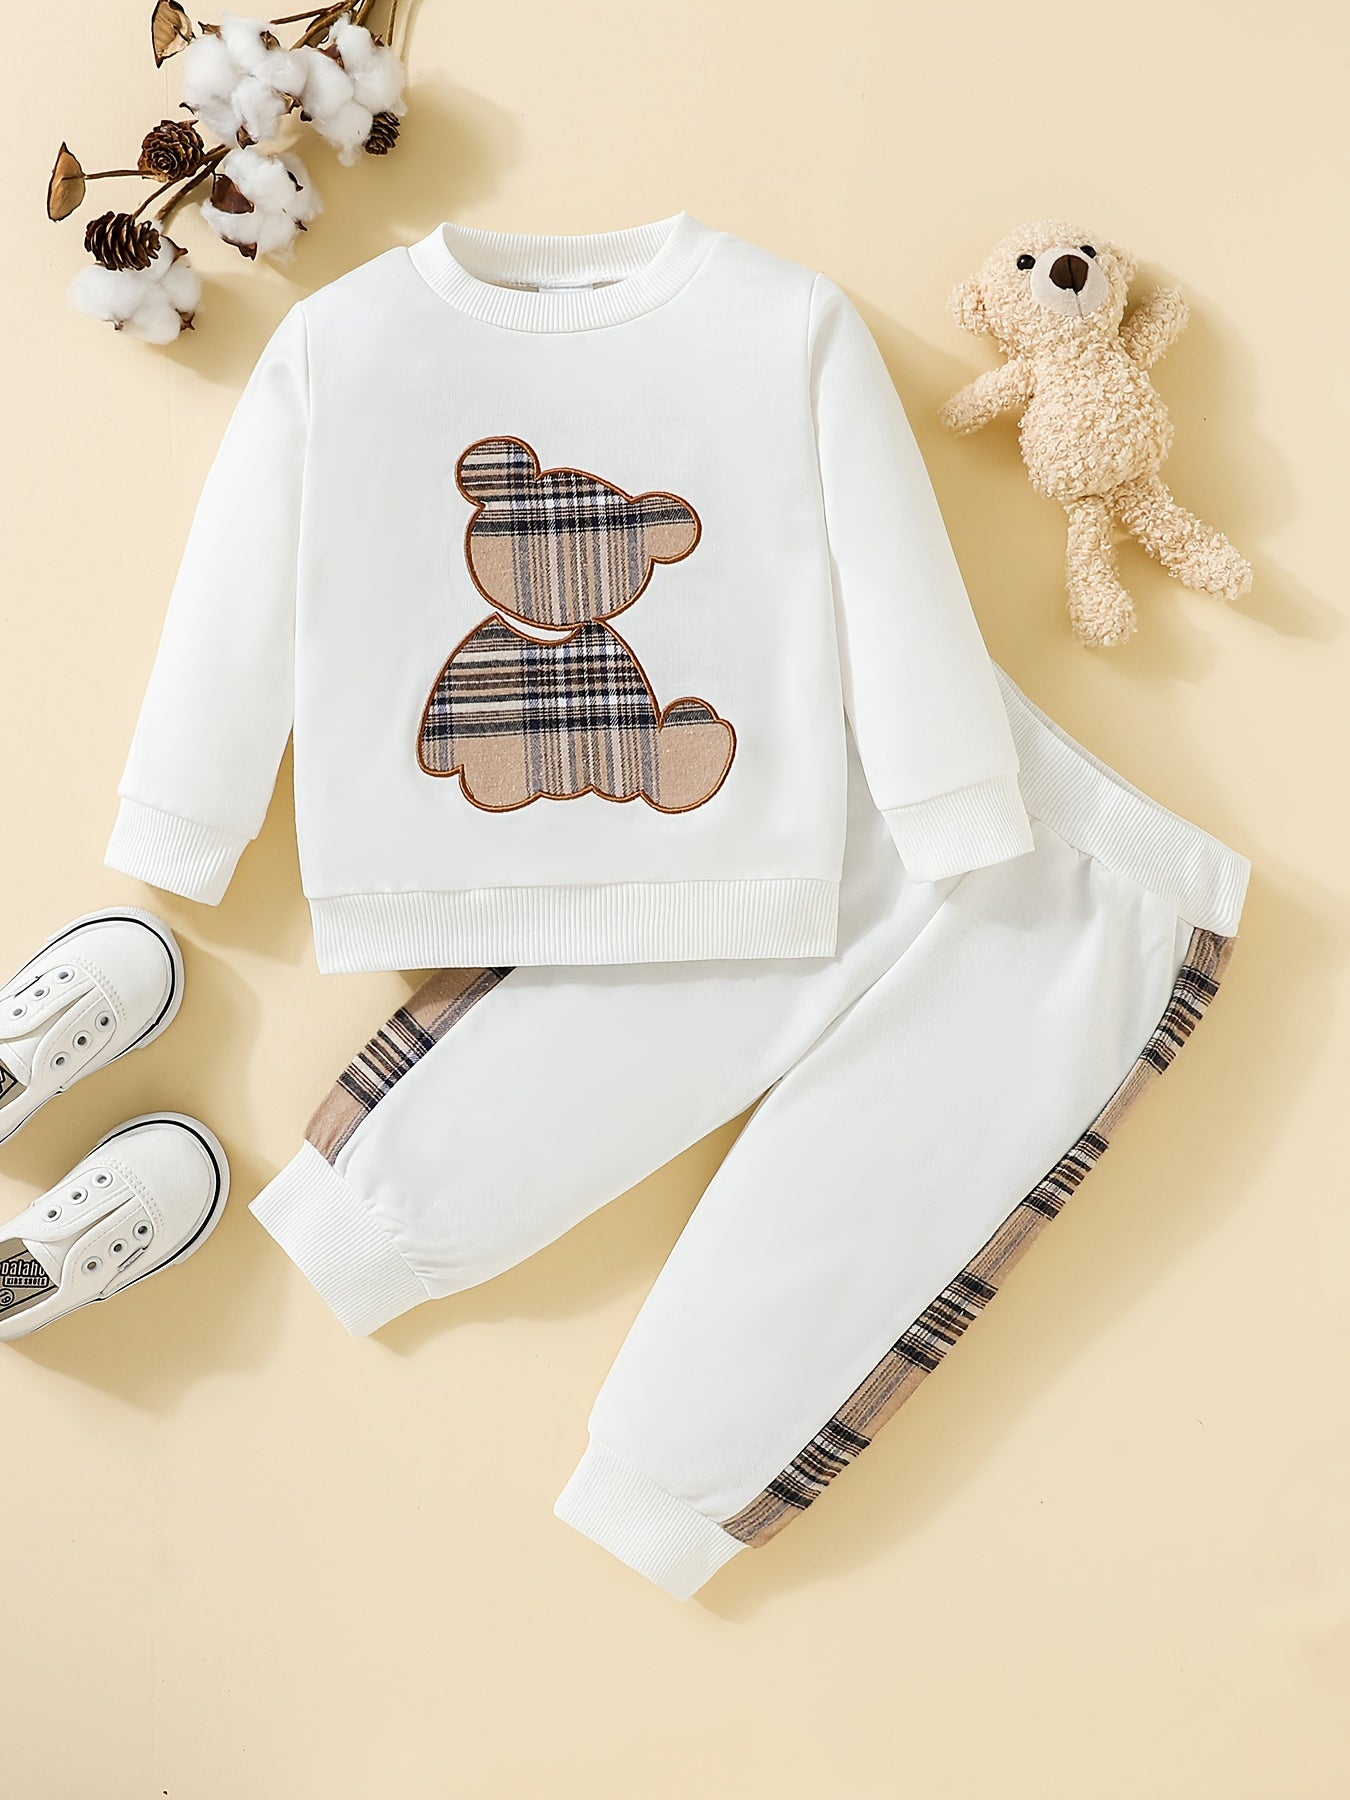 Adorable 2pcs Outfit For Toddler Girls & Boys - Bear Embroidery Sweatshirt & Splicing Pants!